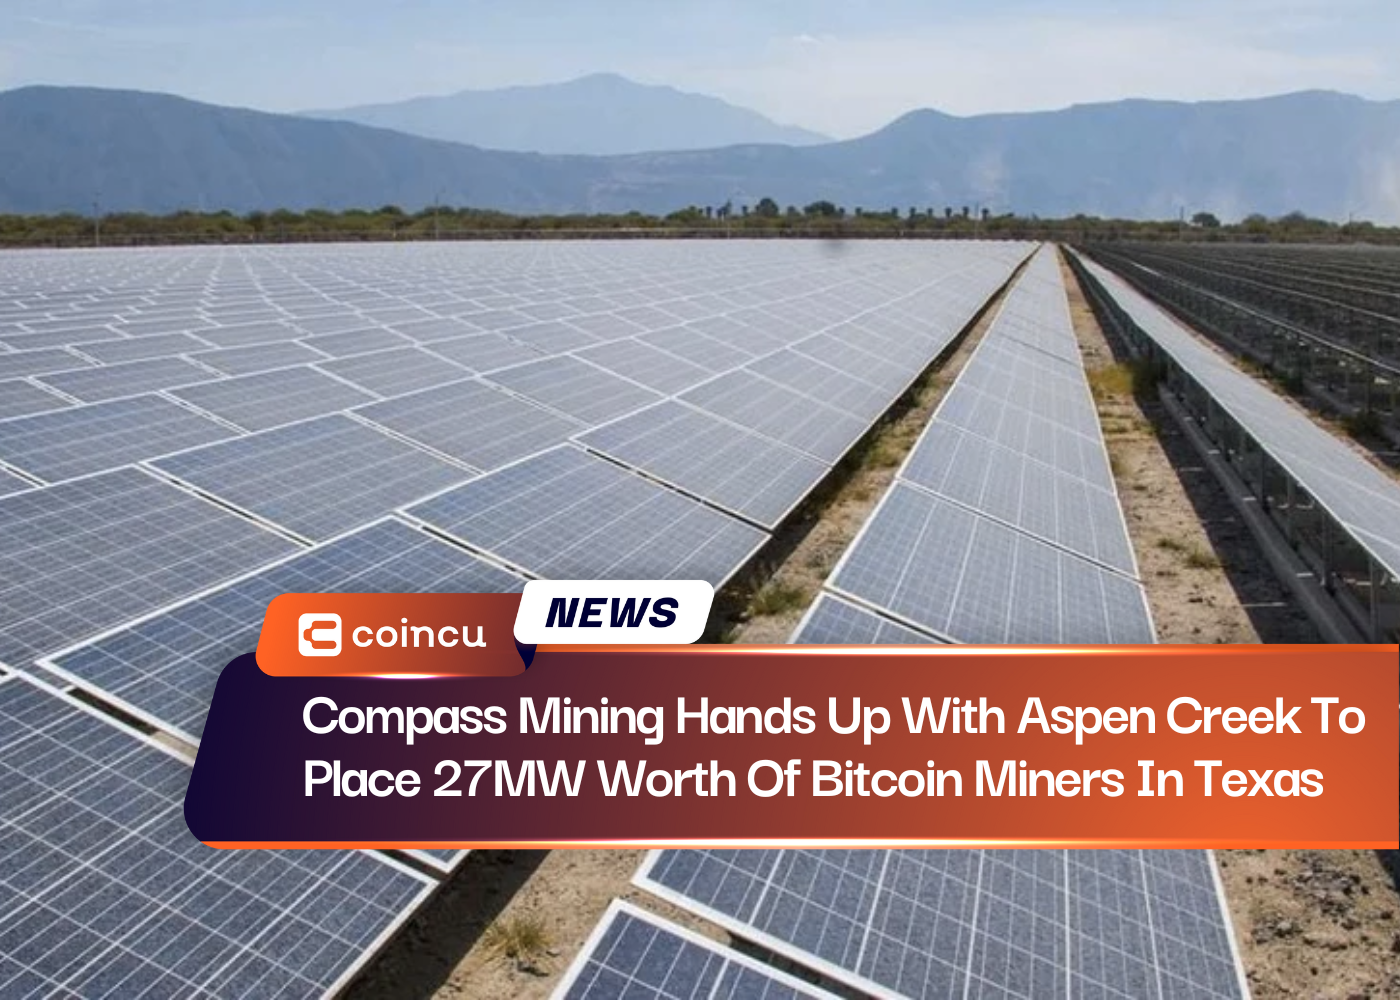 Compass Mining Hands Up With Aspen Creek To Place 27MW Worth Of Bitcoin Miners In Texas